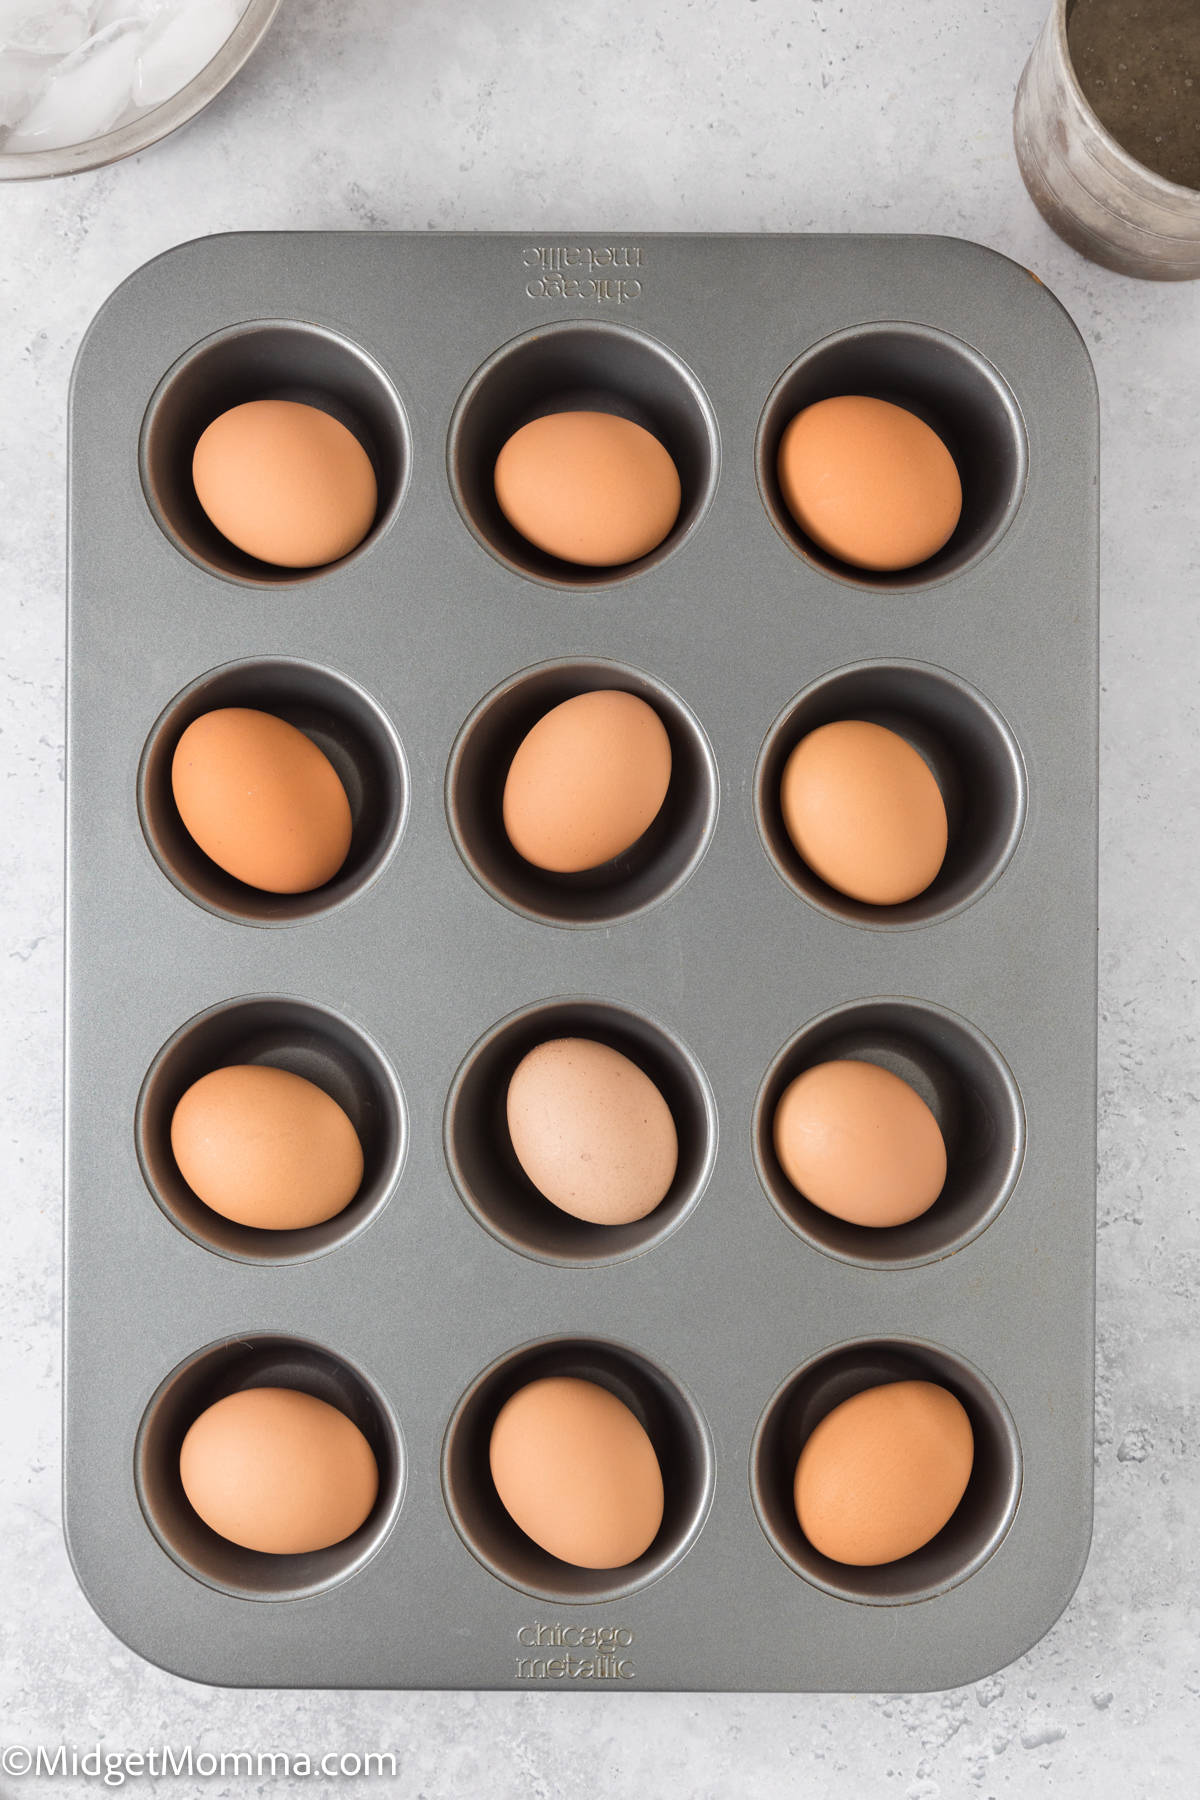 A muffin tin with eggs in it.